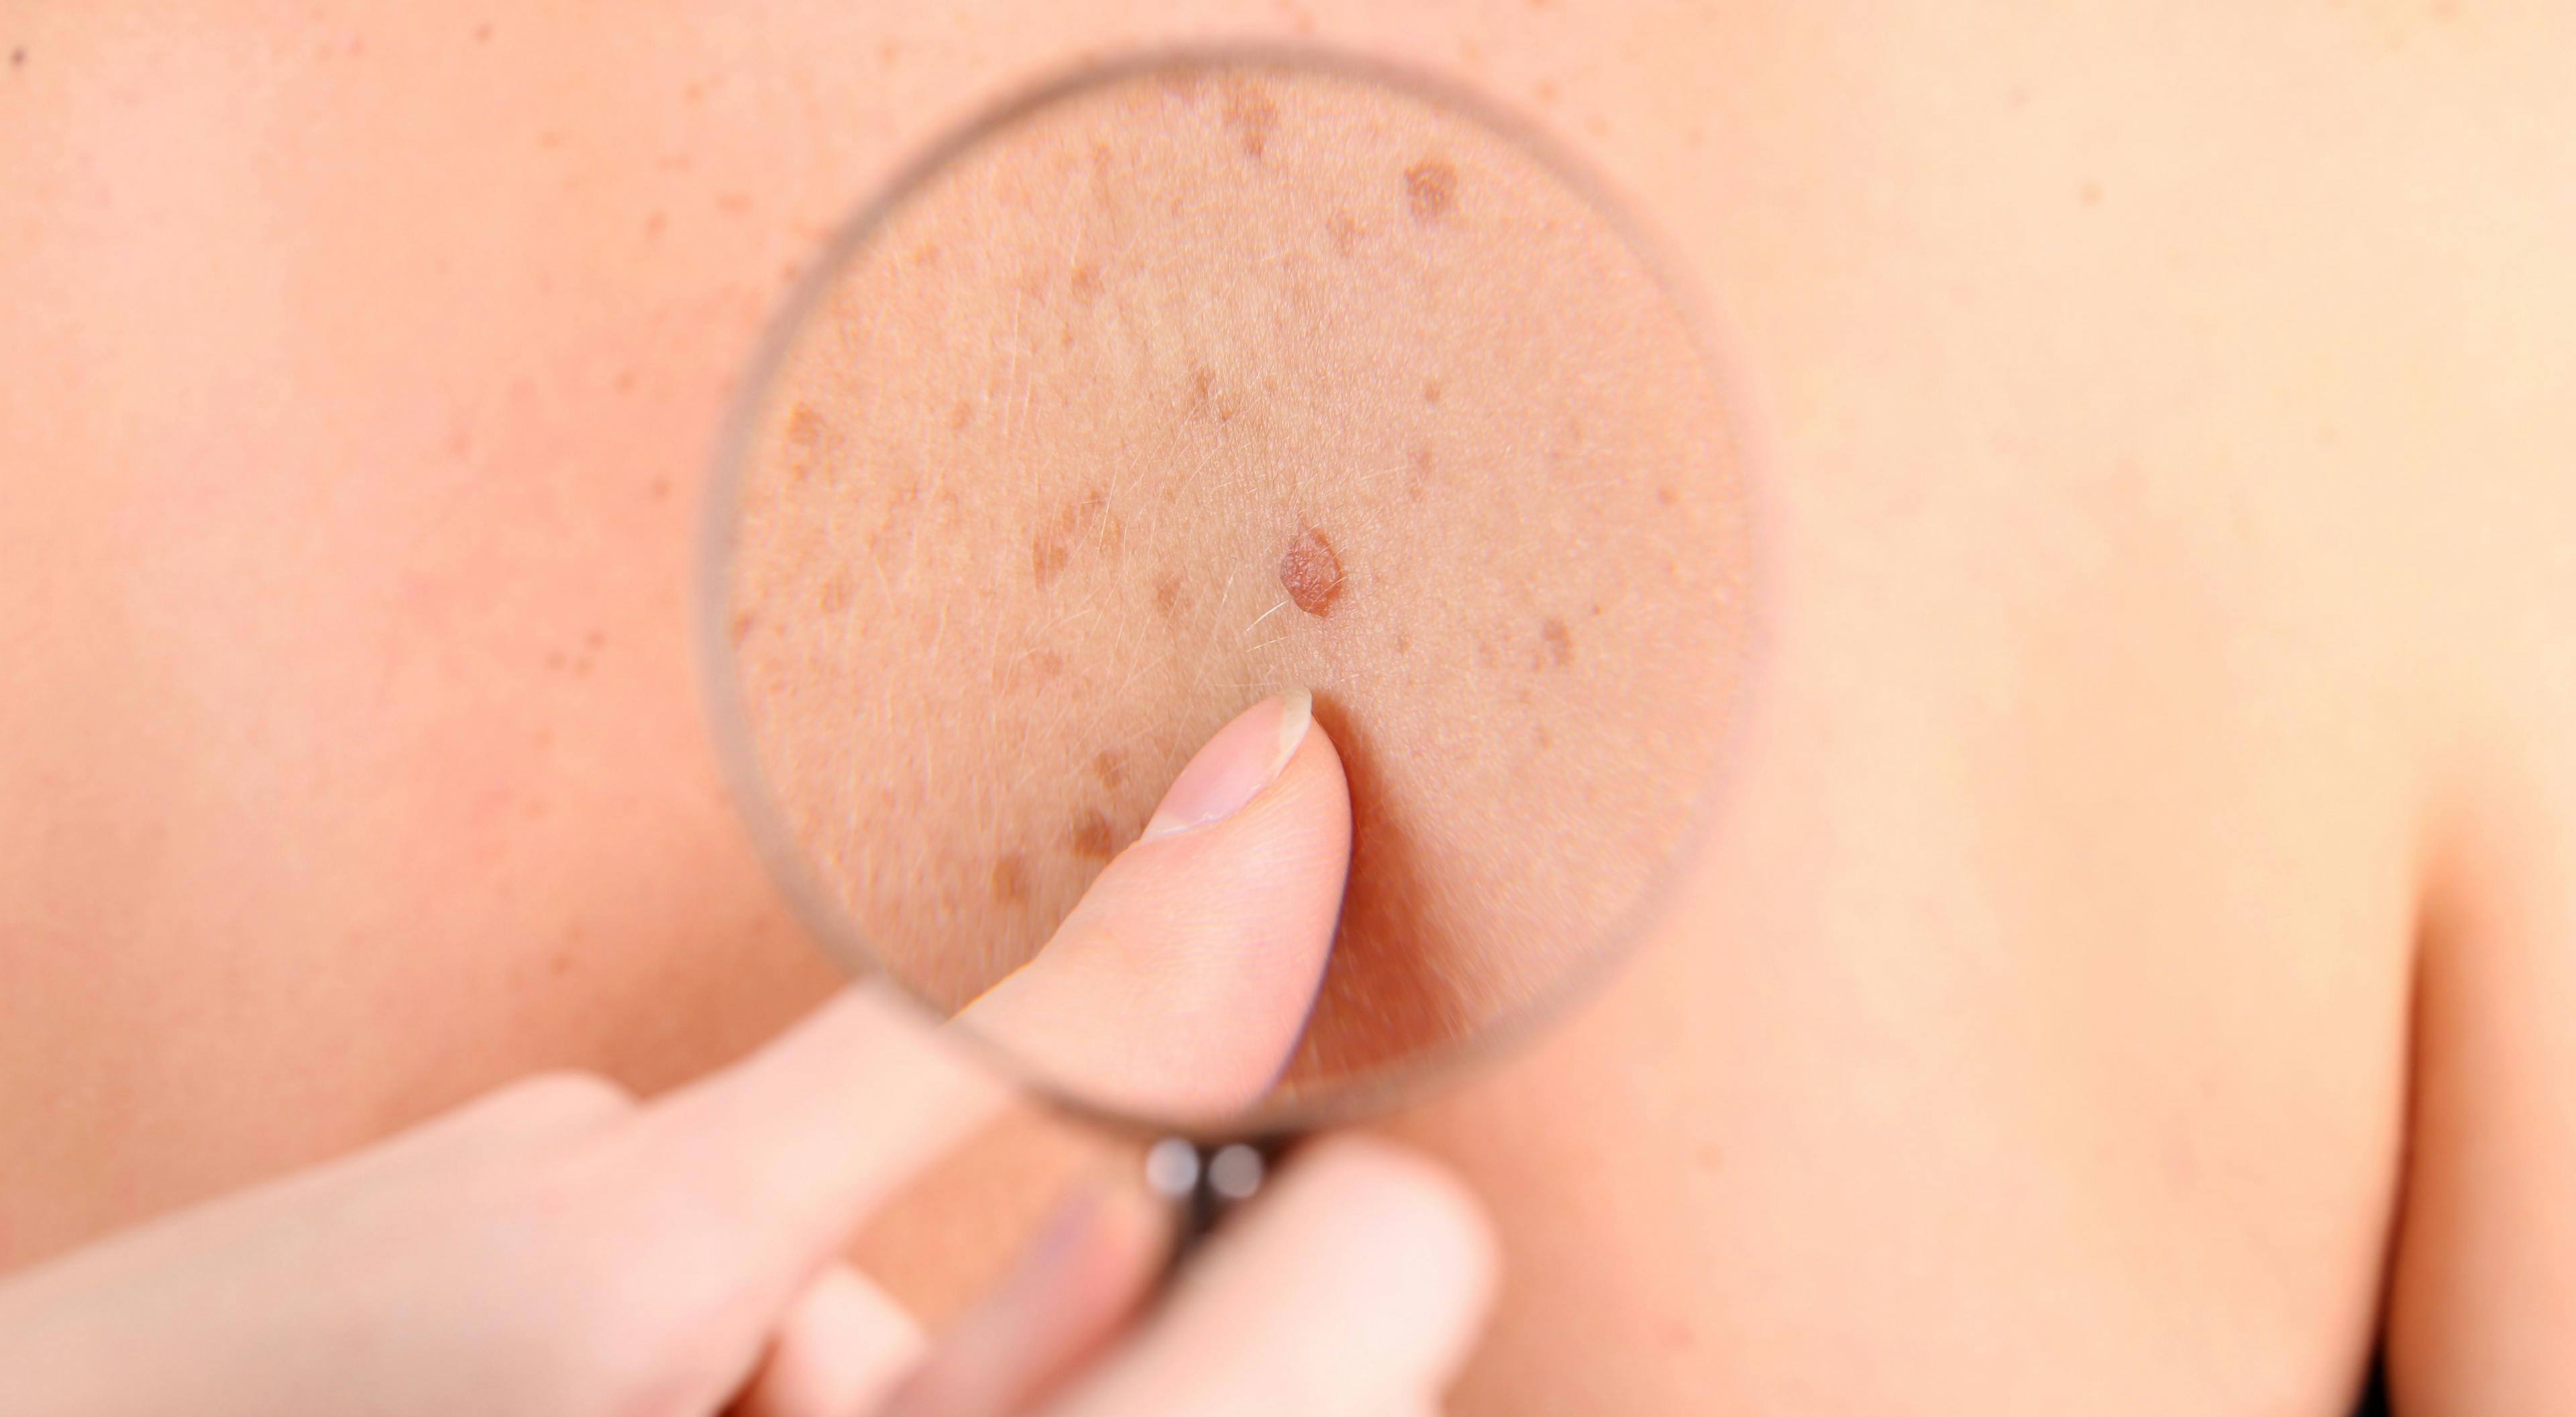 Visible Melanoma Lesions Affect Patients' Physical, Emotional Quality of Life